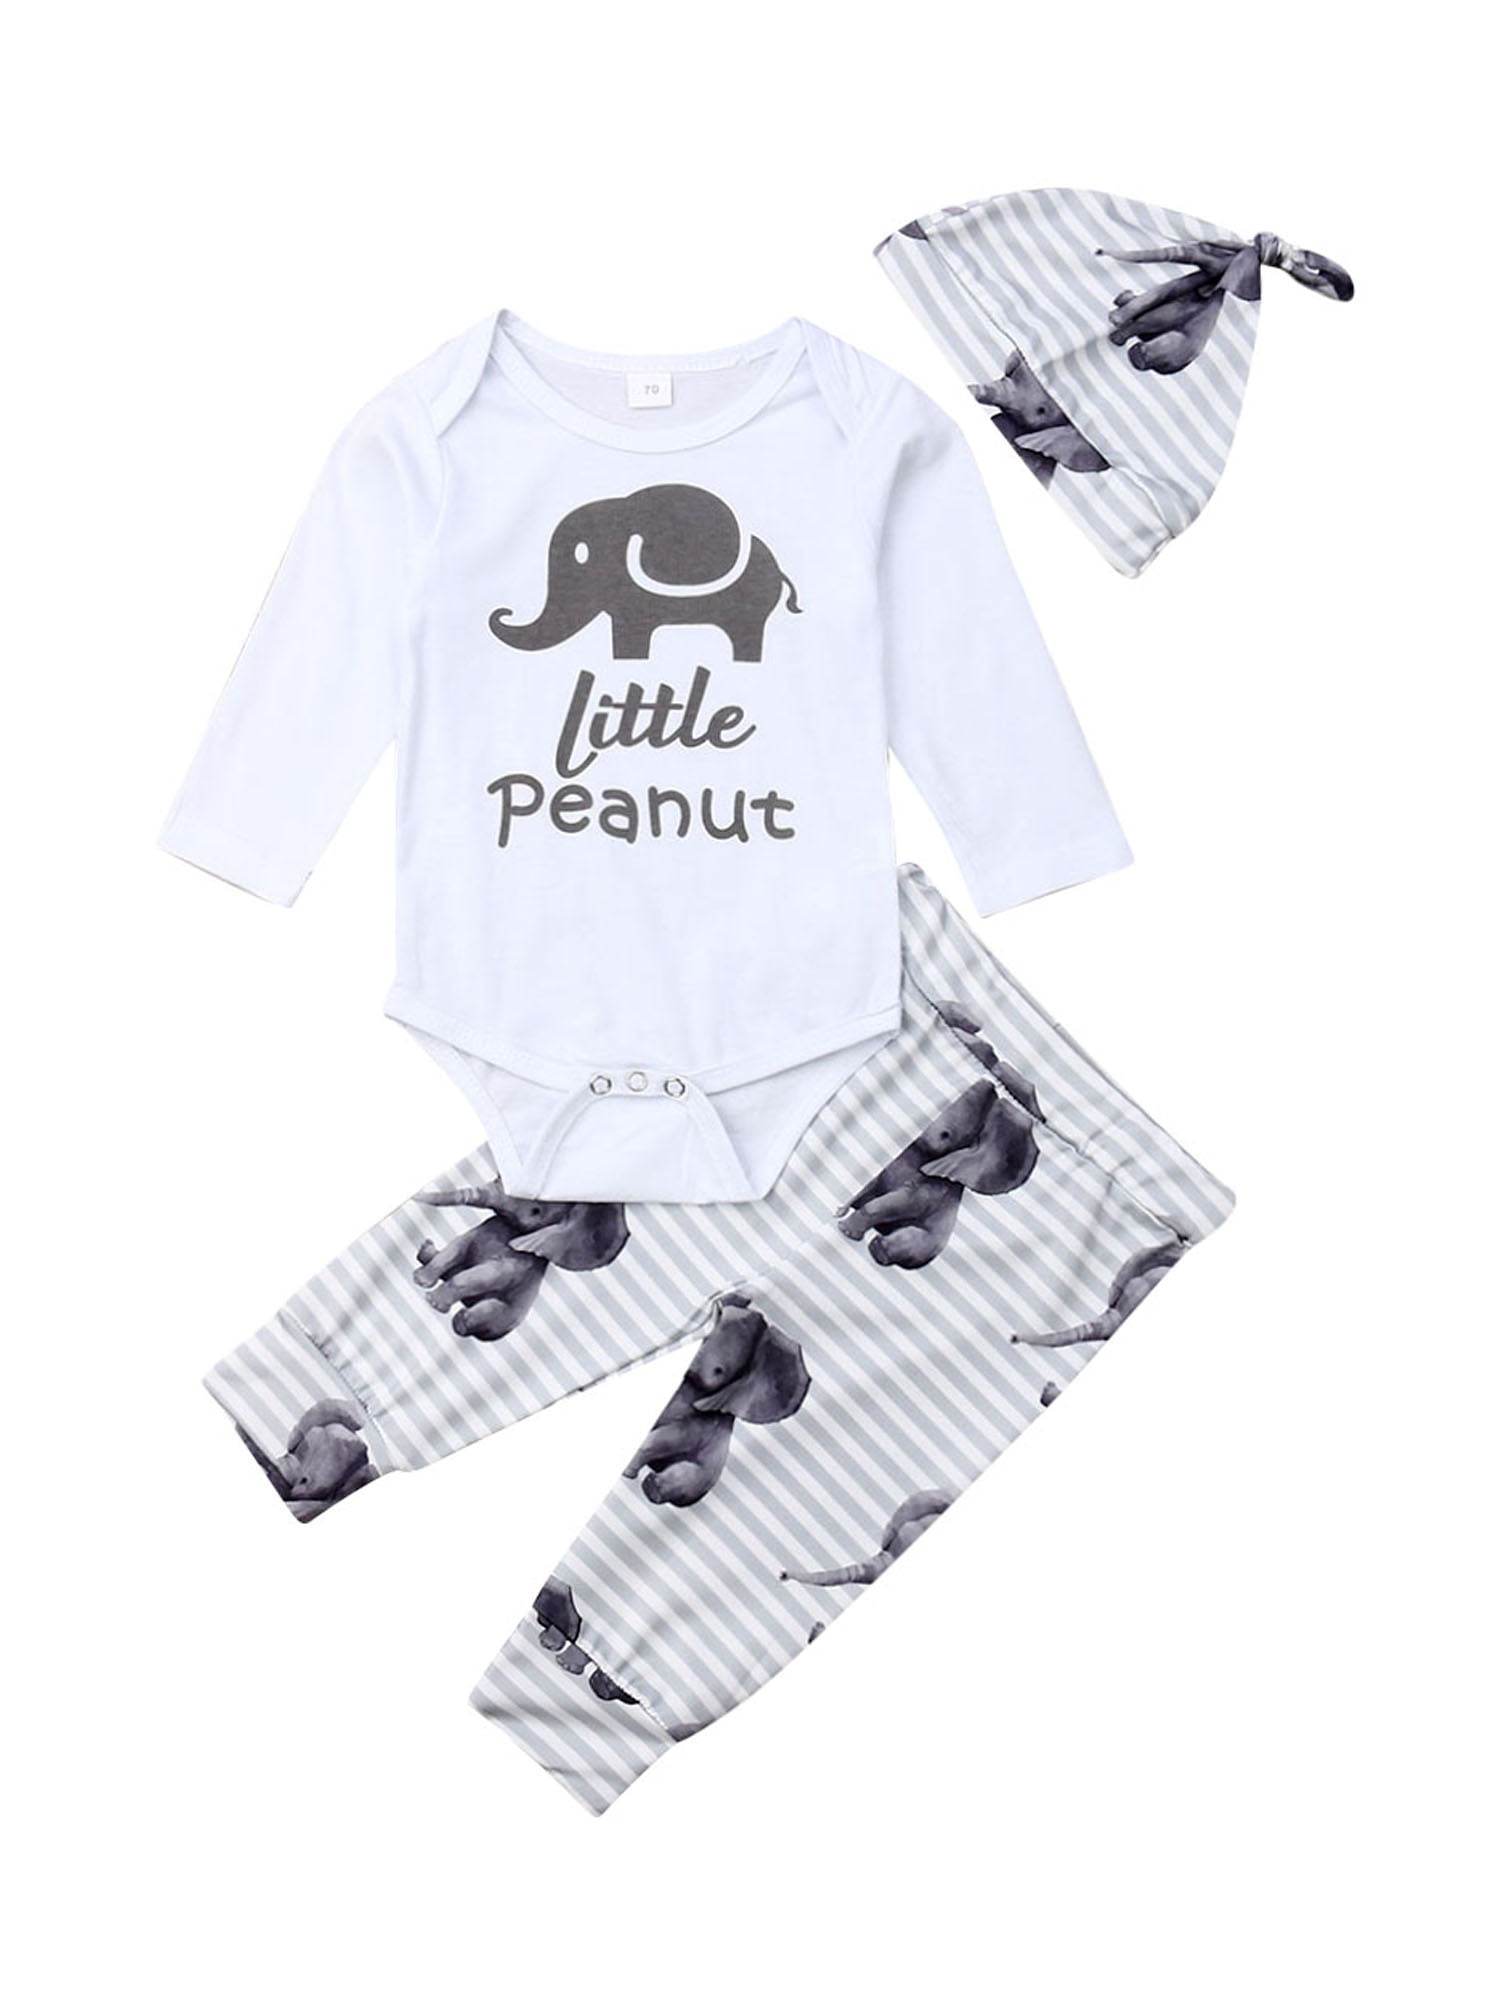 Details about   My 1st Halloween Baby Newborn or 0-3 Month Choice Pajama Sleeper Cotton Striped 